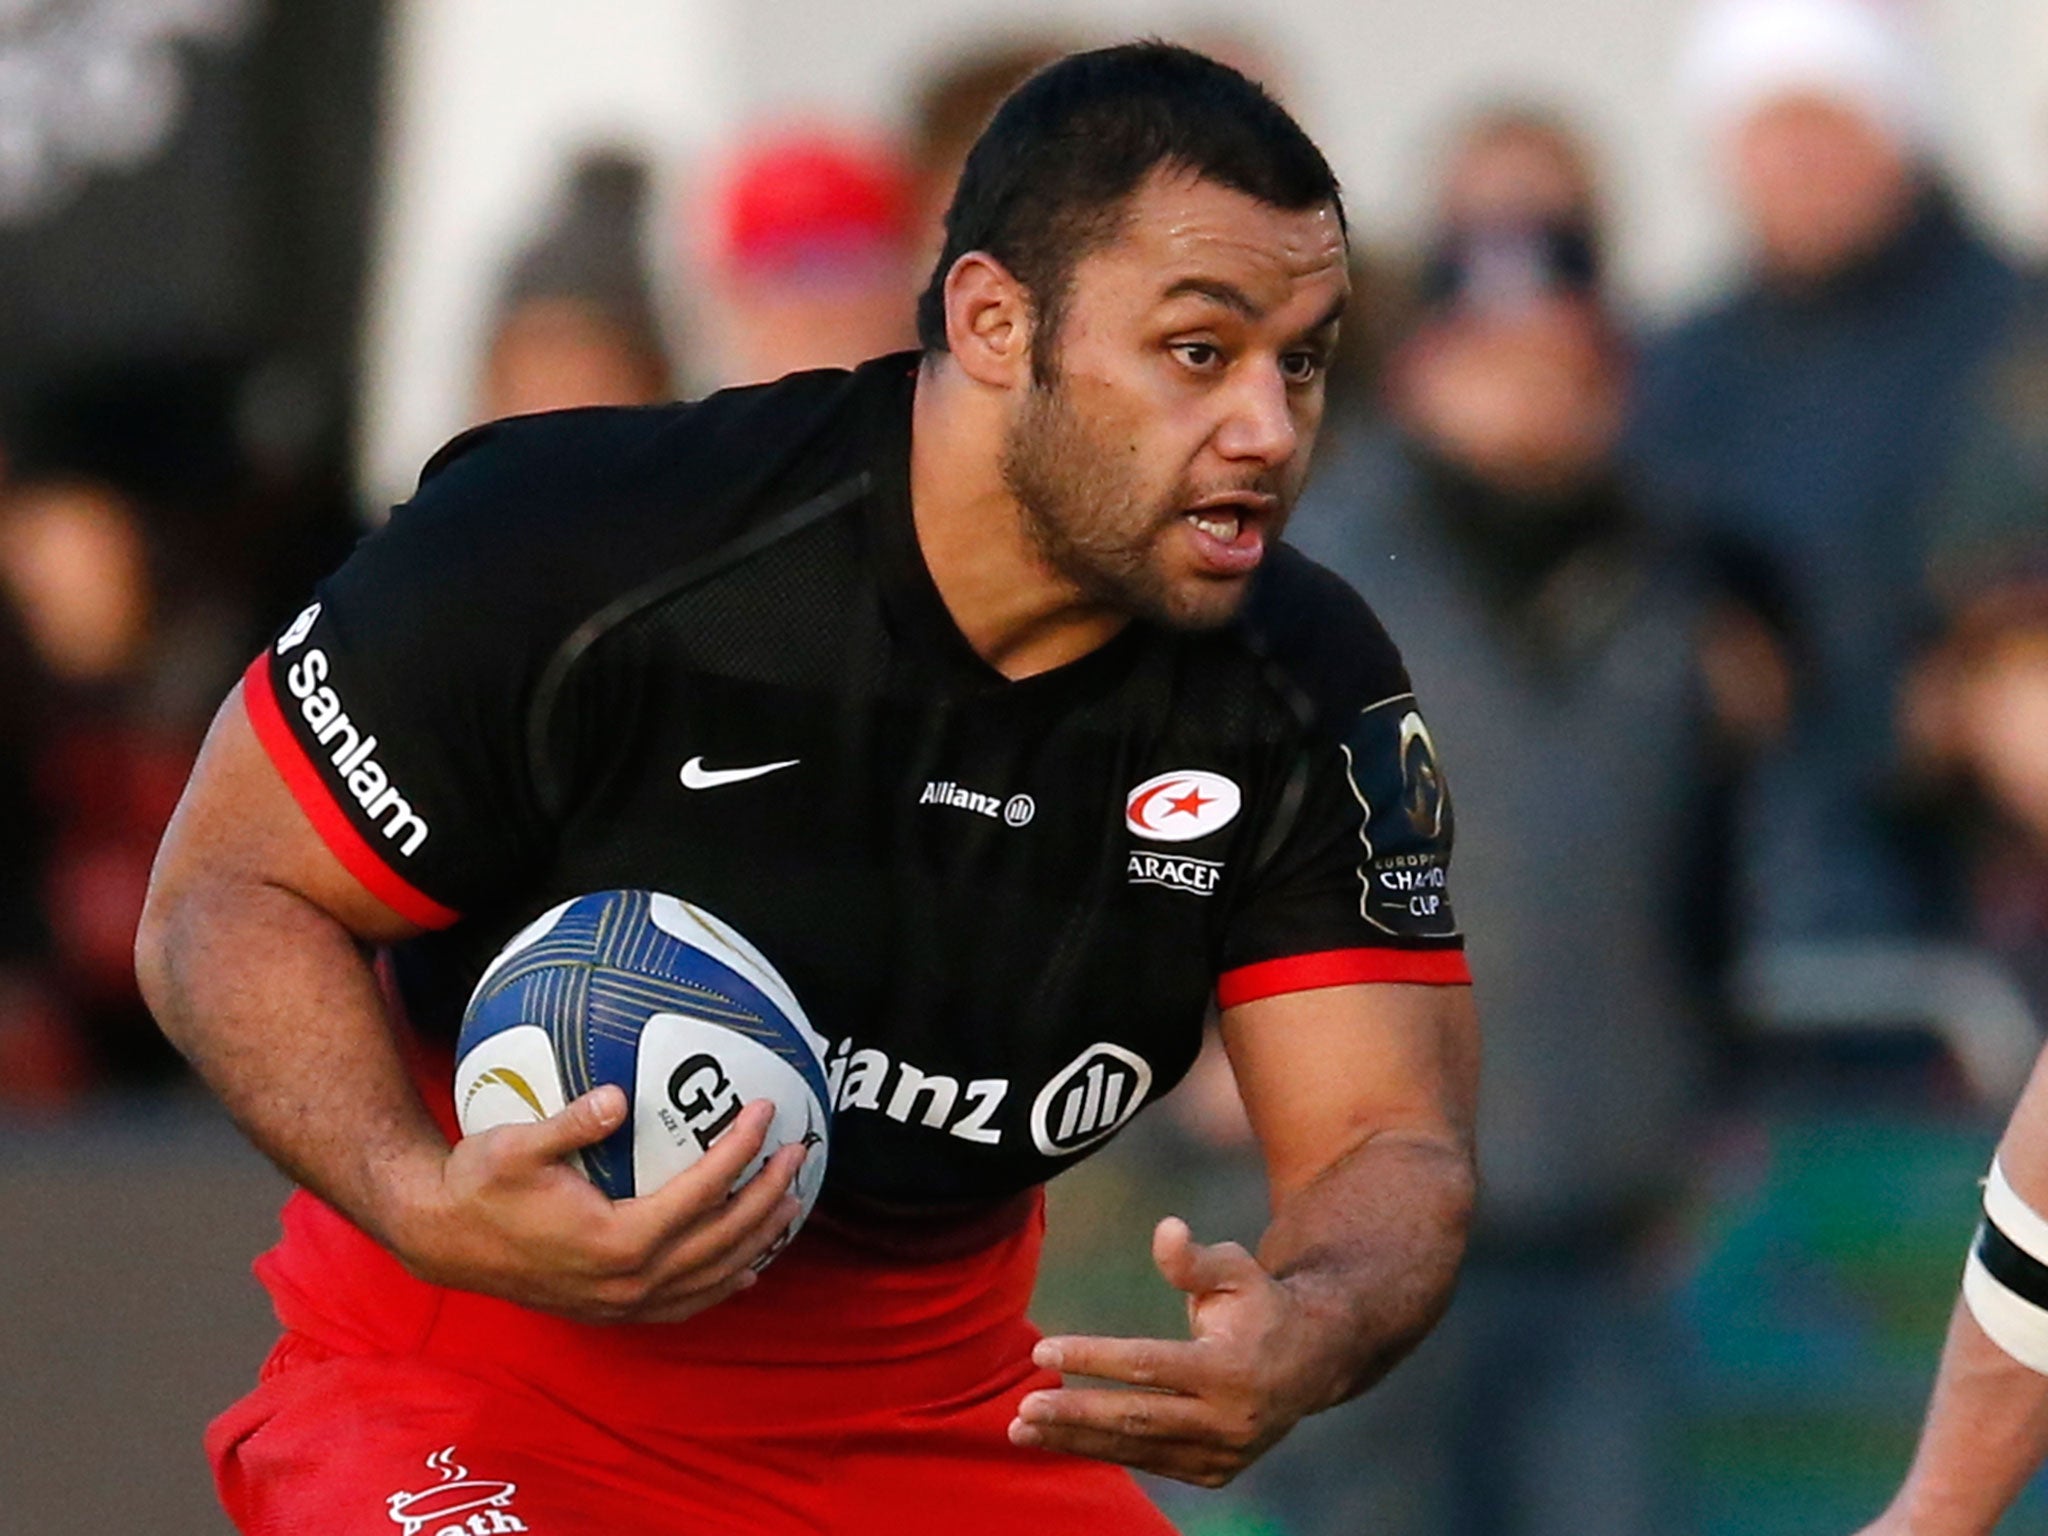 Billy Vunipola has set his sights high after scoring Saracens’ first try in their big win over Ulster